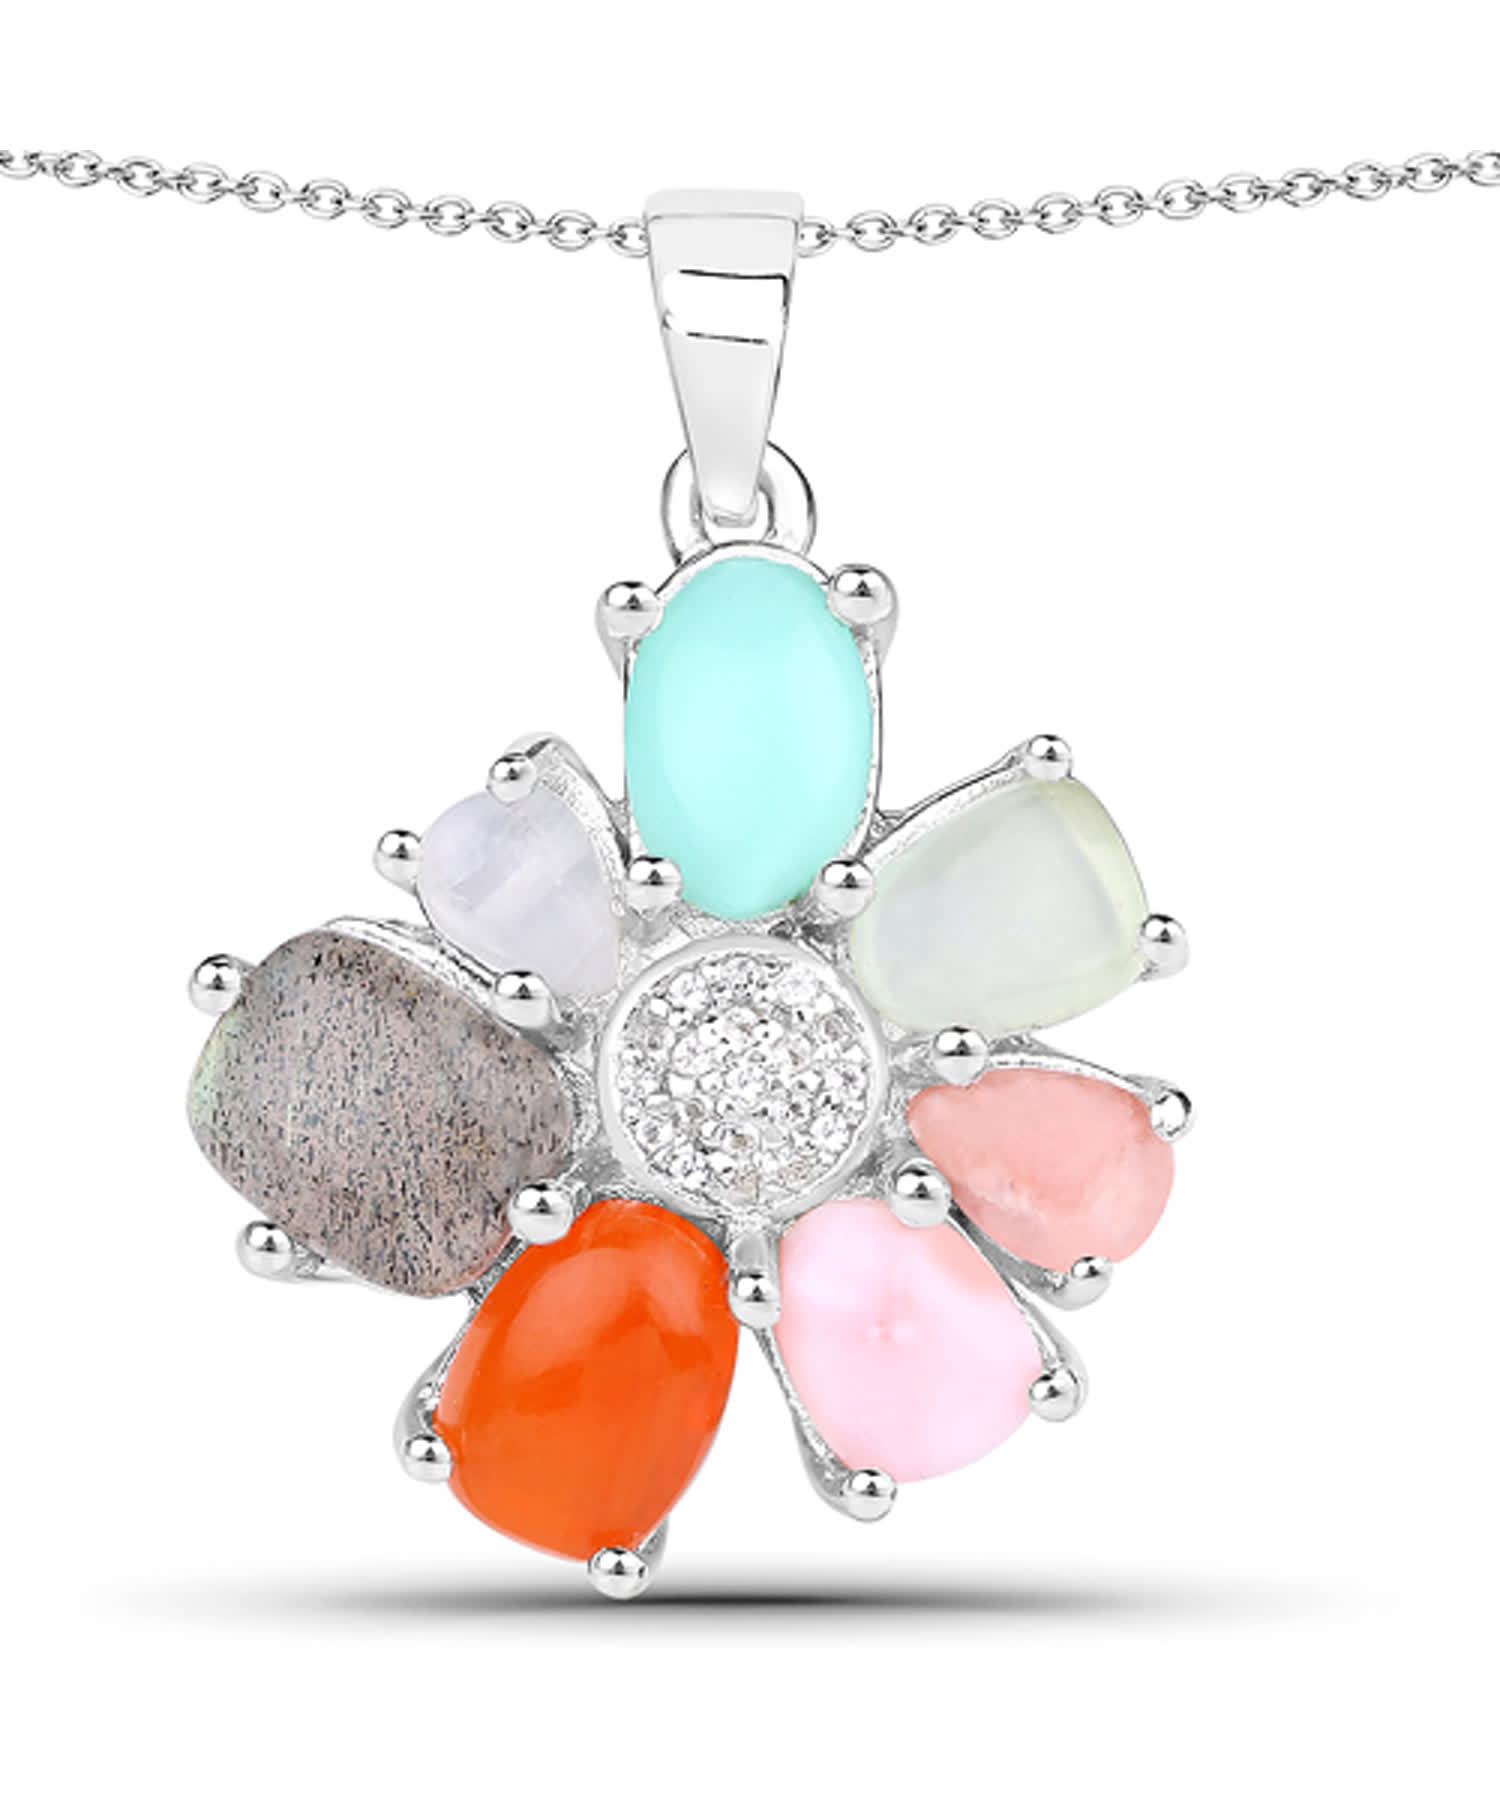 5.11ctw Natural Mixed Gems Rhodium Plated 925 Sterling Silver Pendant With Chain View 1